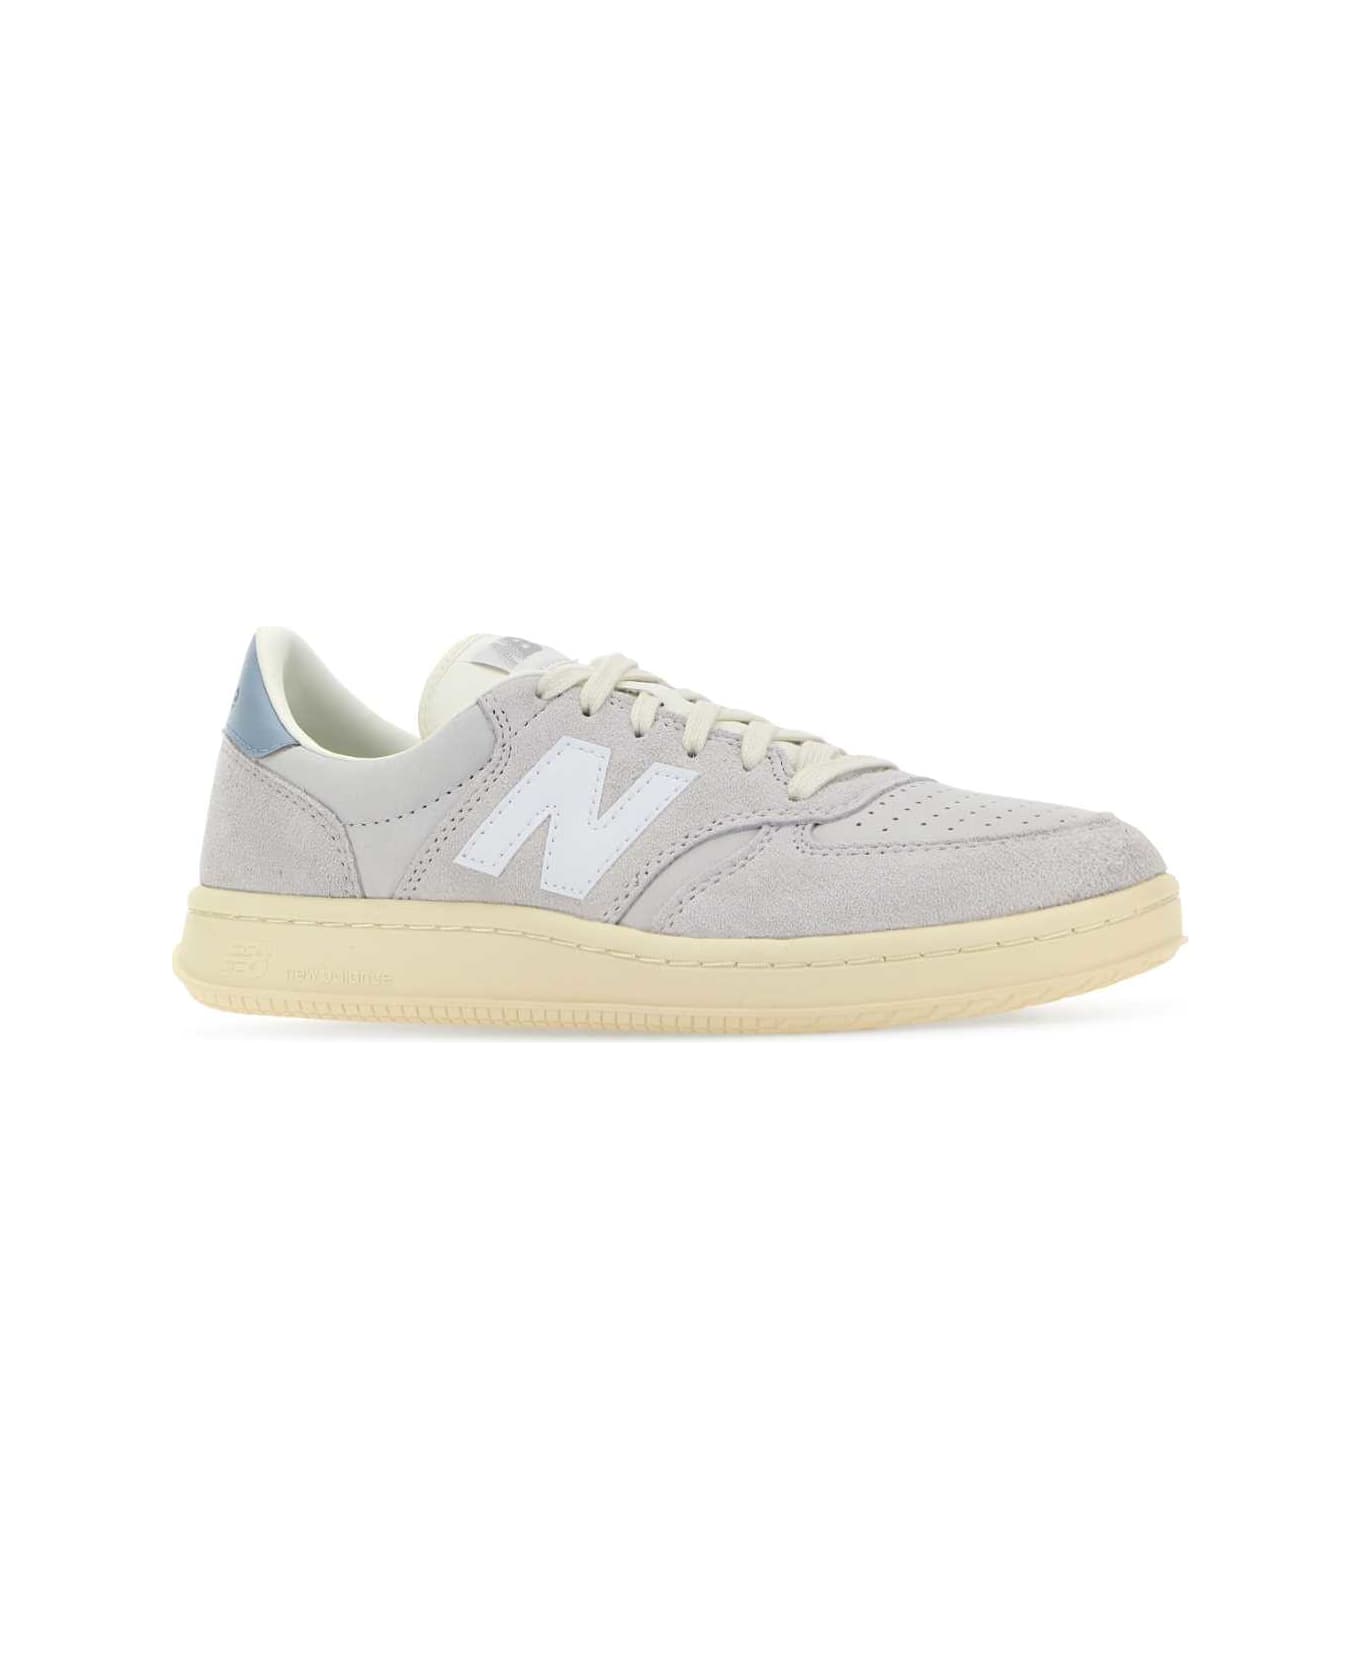 New Balance Light Grey Suede T500 Sneakers - OFFWHITE スニーカー